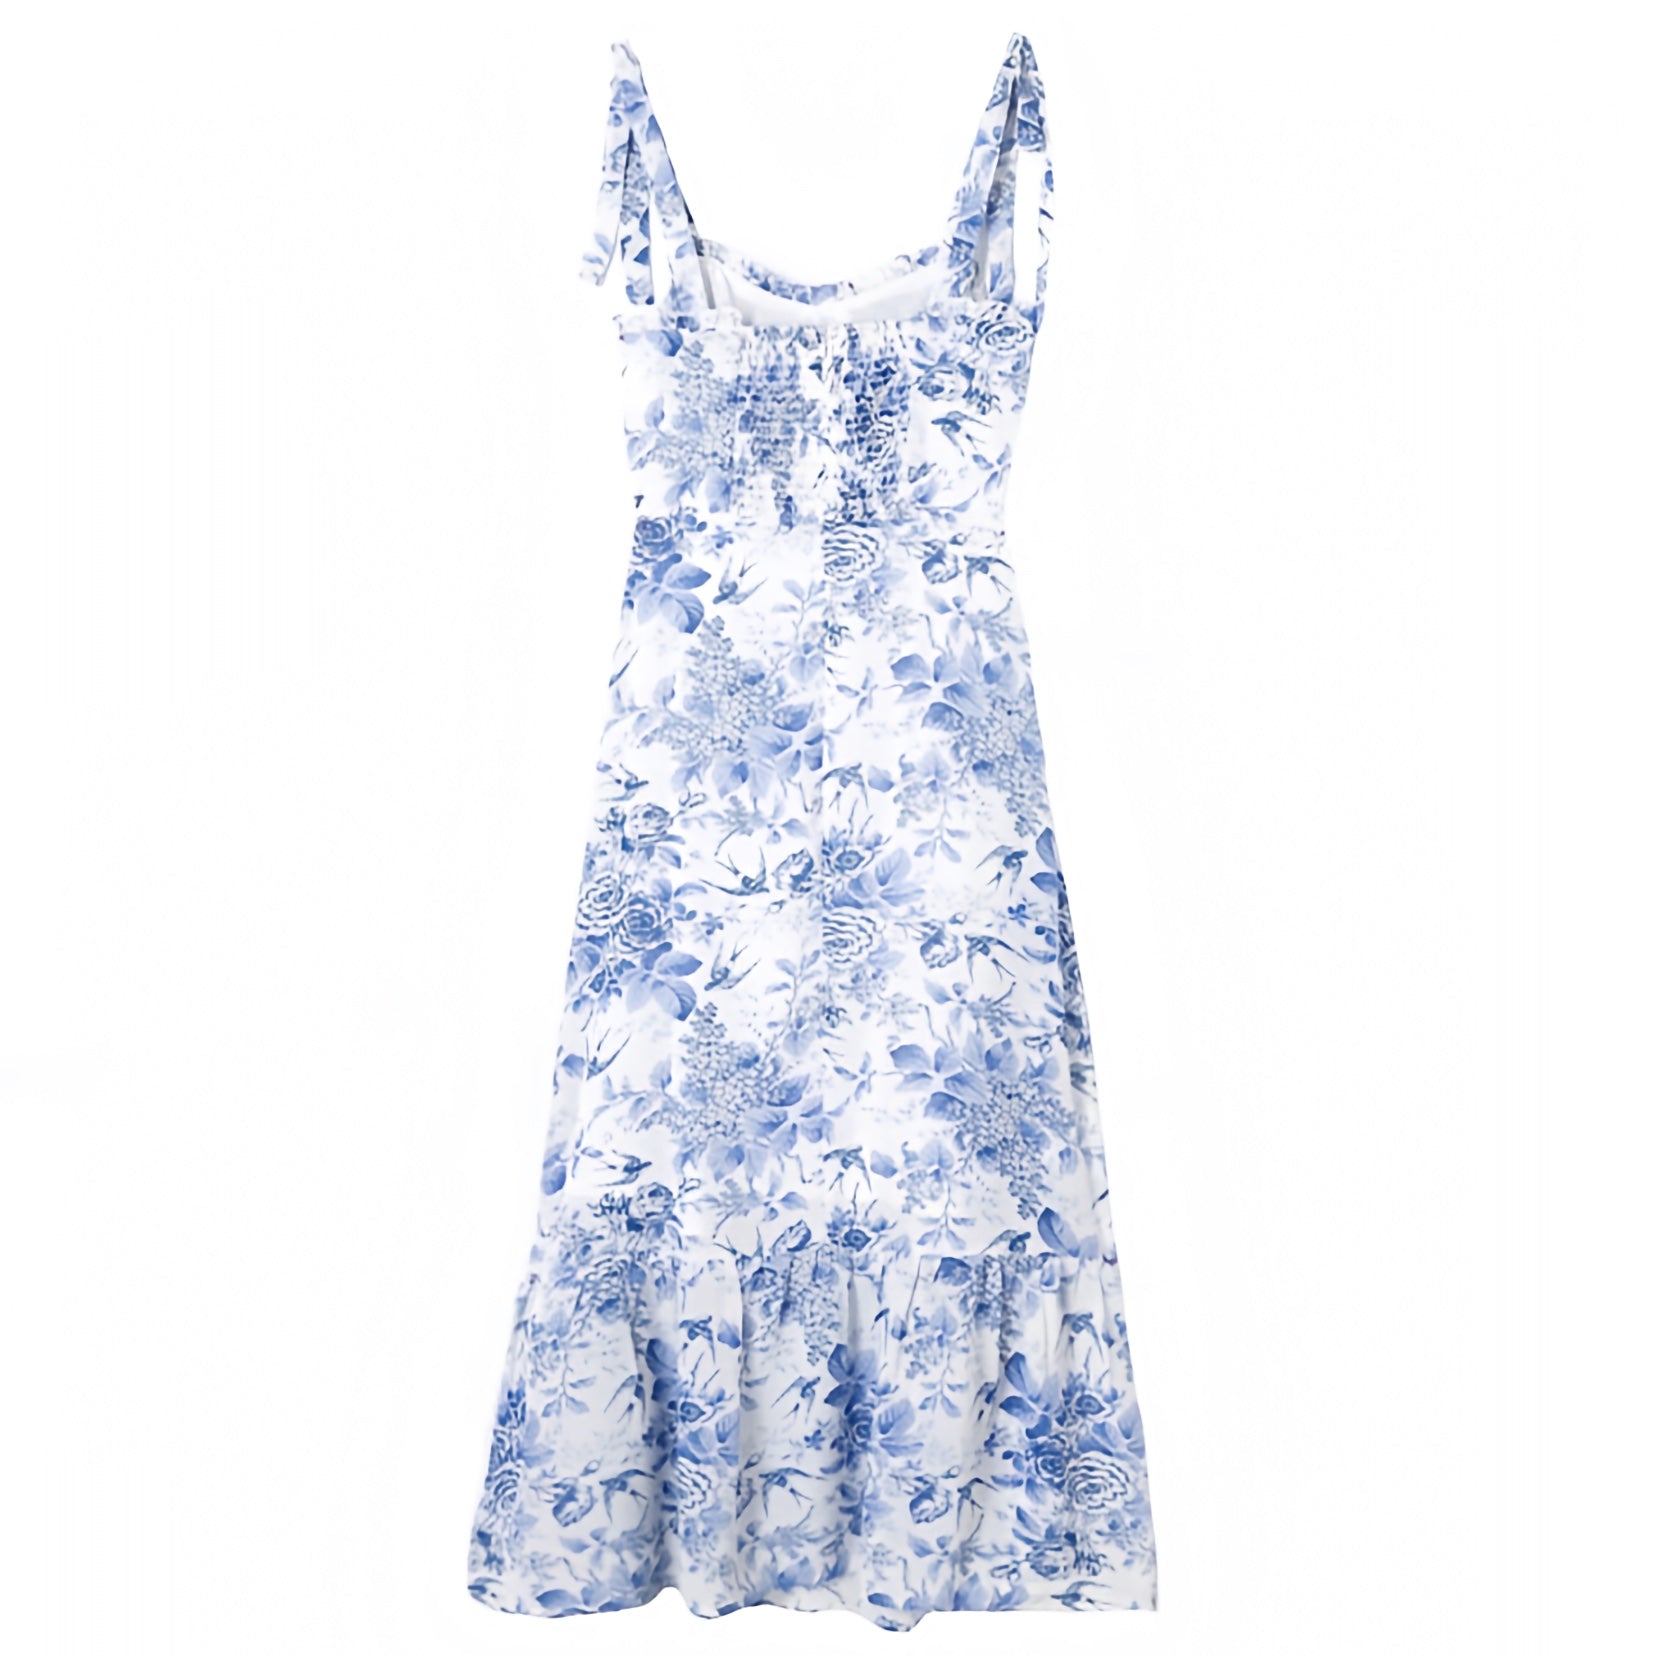 floral-print-light-blue-and-white-multi-color-flower-patterned-slim-fit-bodycon-corset-bustier-ruffle-trim-bow-string-tie-spaghetti-strap-sweetheart-neckline-sleeveless-tiered-flowy-midi-long-maxi-dress-evening-gown-women-ladies-teens-tweens-chic-trendy-spring-2024-summer-elegant-casual-semi-formal-classy-feminine-prom-party-wedding-guest-debutante-homecoming-dance-preppy-style-beach-wear-vacation-sundress-coastal-granddaughter-altard-state-hill-house-revolve-reformation-loveshackfancy-zara-dupe